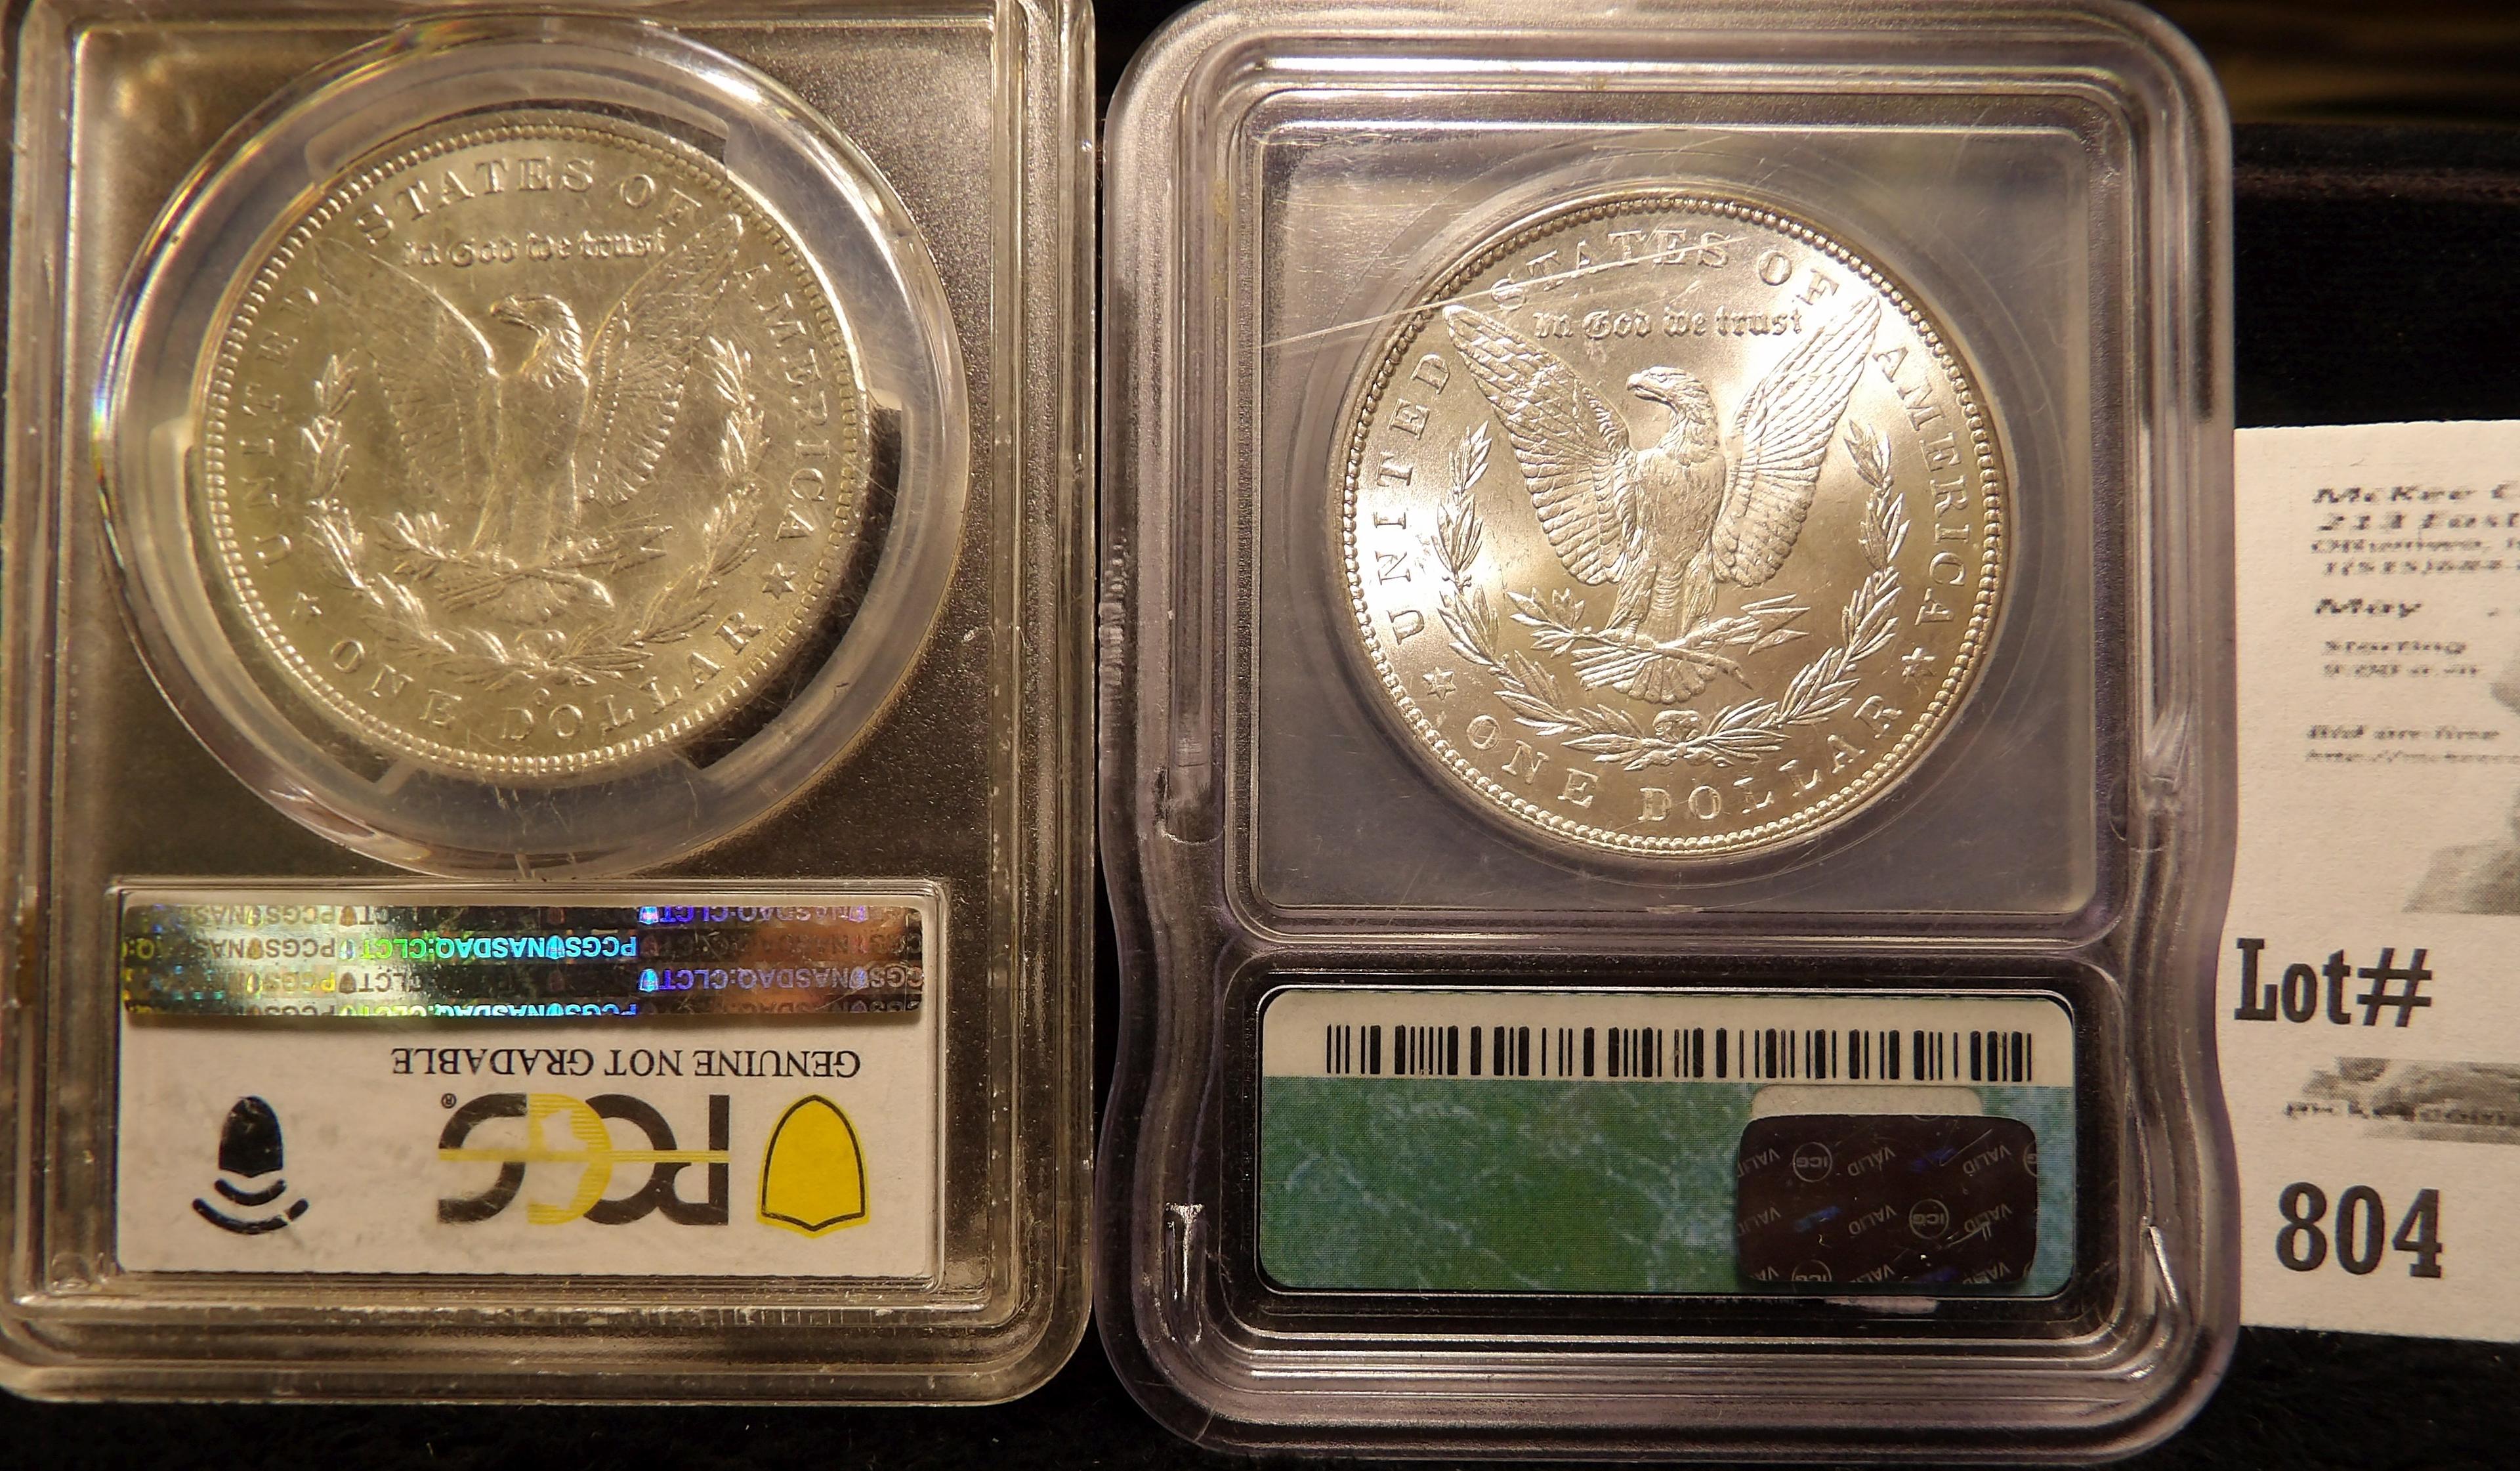 1885 O PCGS Genuine Cleaned UNC details & 1887 P slabbed ICG MS63 Morgan Silver Dollars.